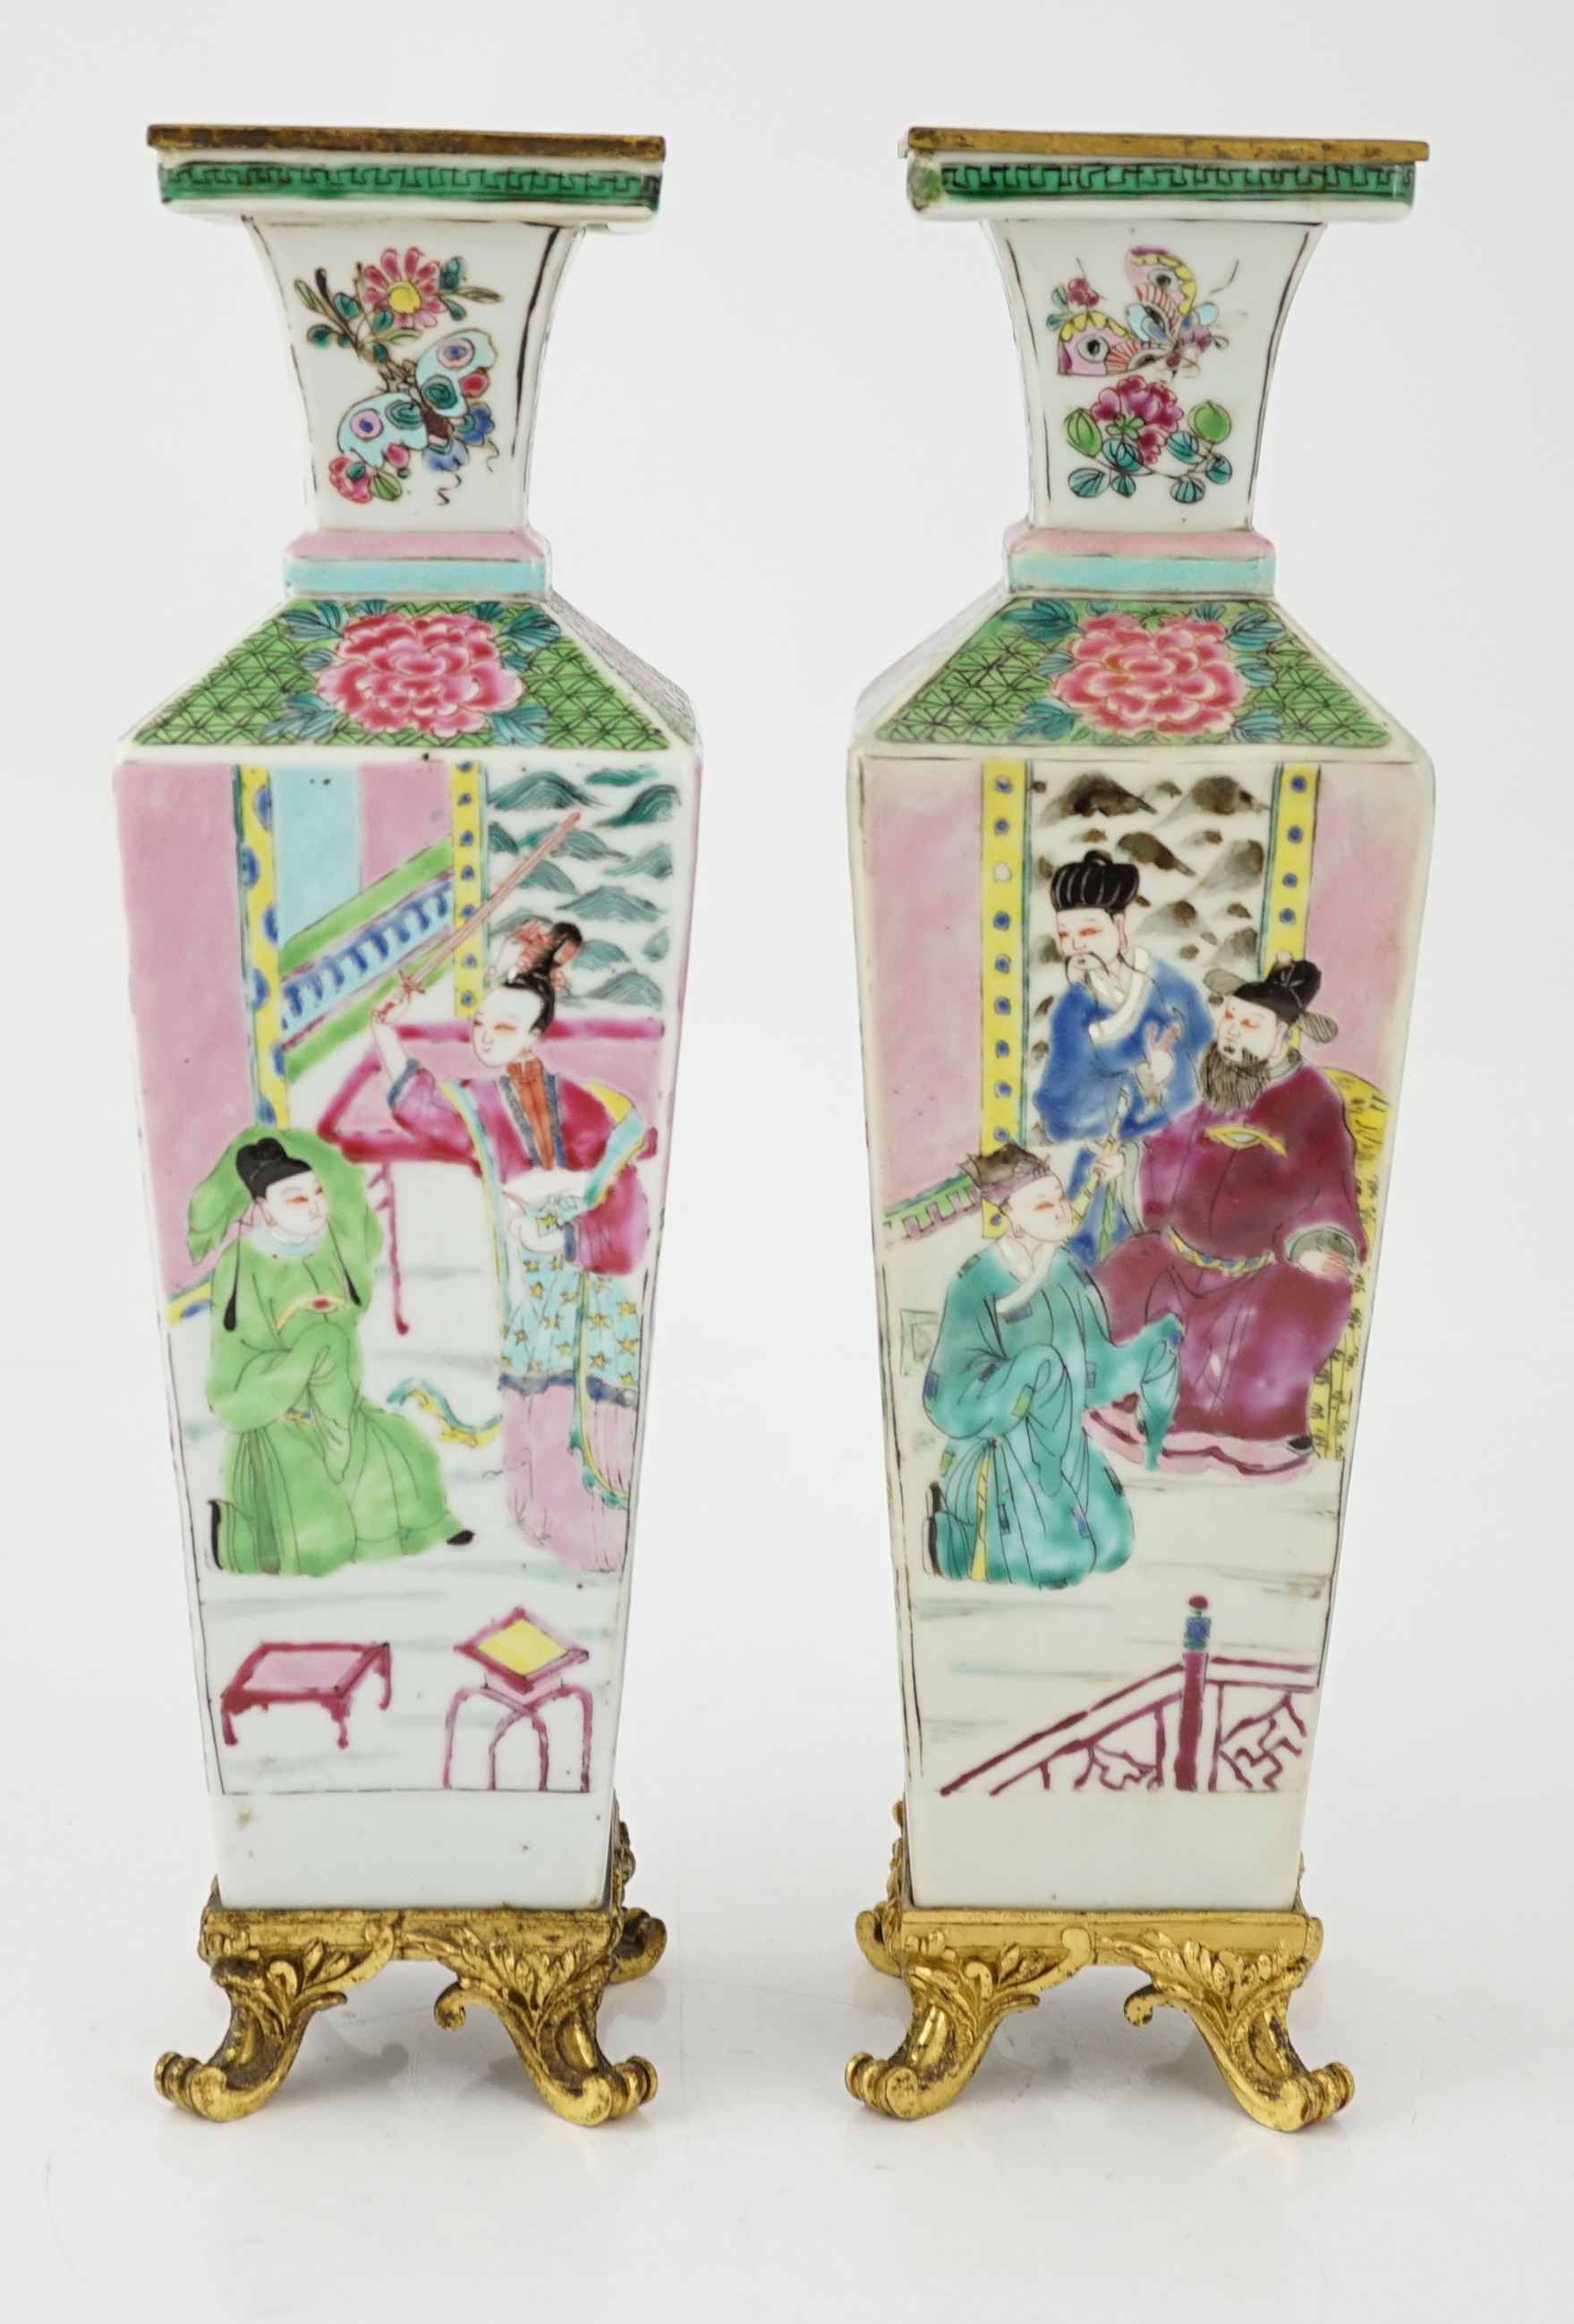 A pair of Chinese famille rose square baluster vases, late 19th/early 20th century, with European gilt metal mounts, each painted with figure scenes, total height 32cm